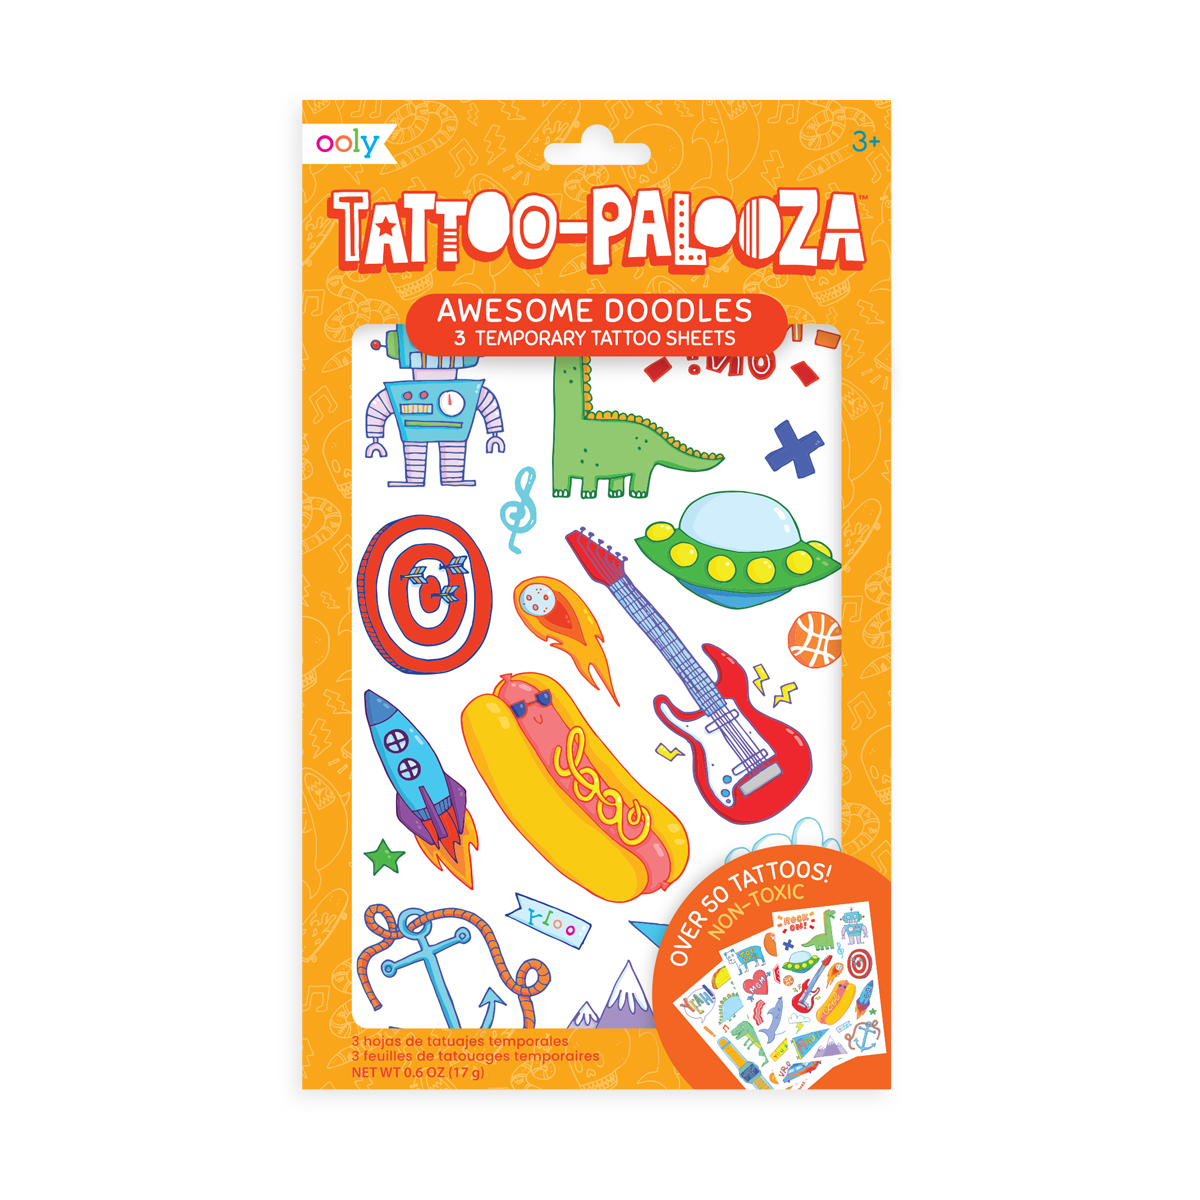 Tattoo-Palooza Temporary Tattoos - Over the Rainbow in packaging